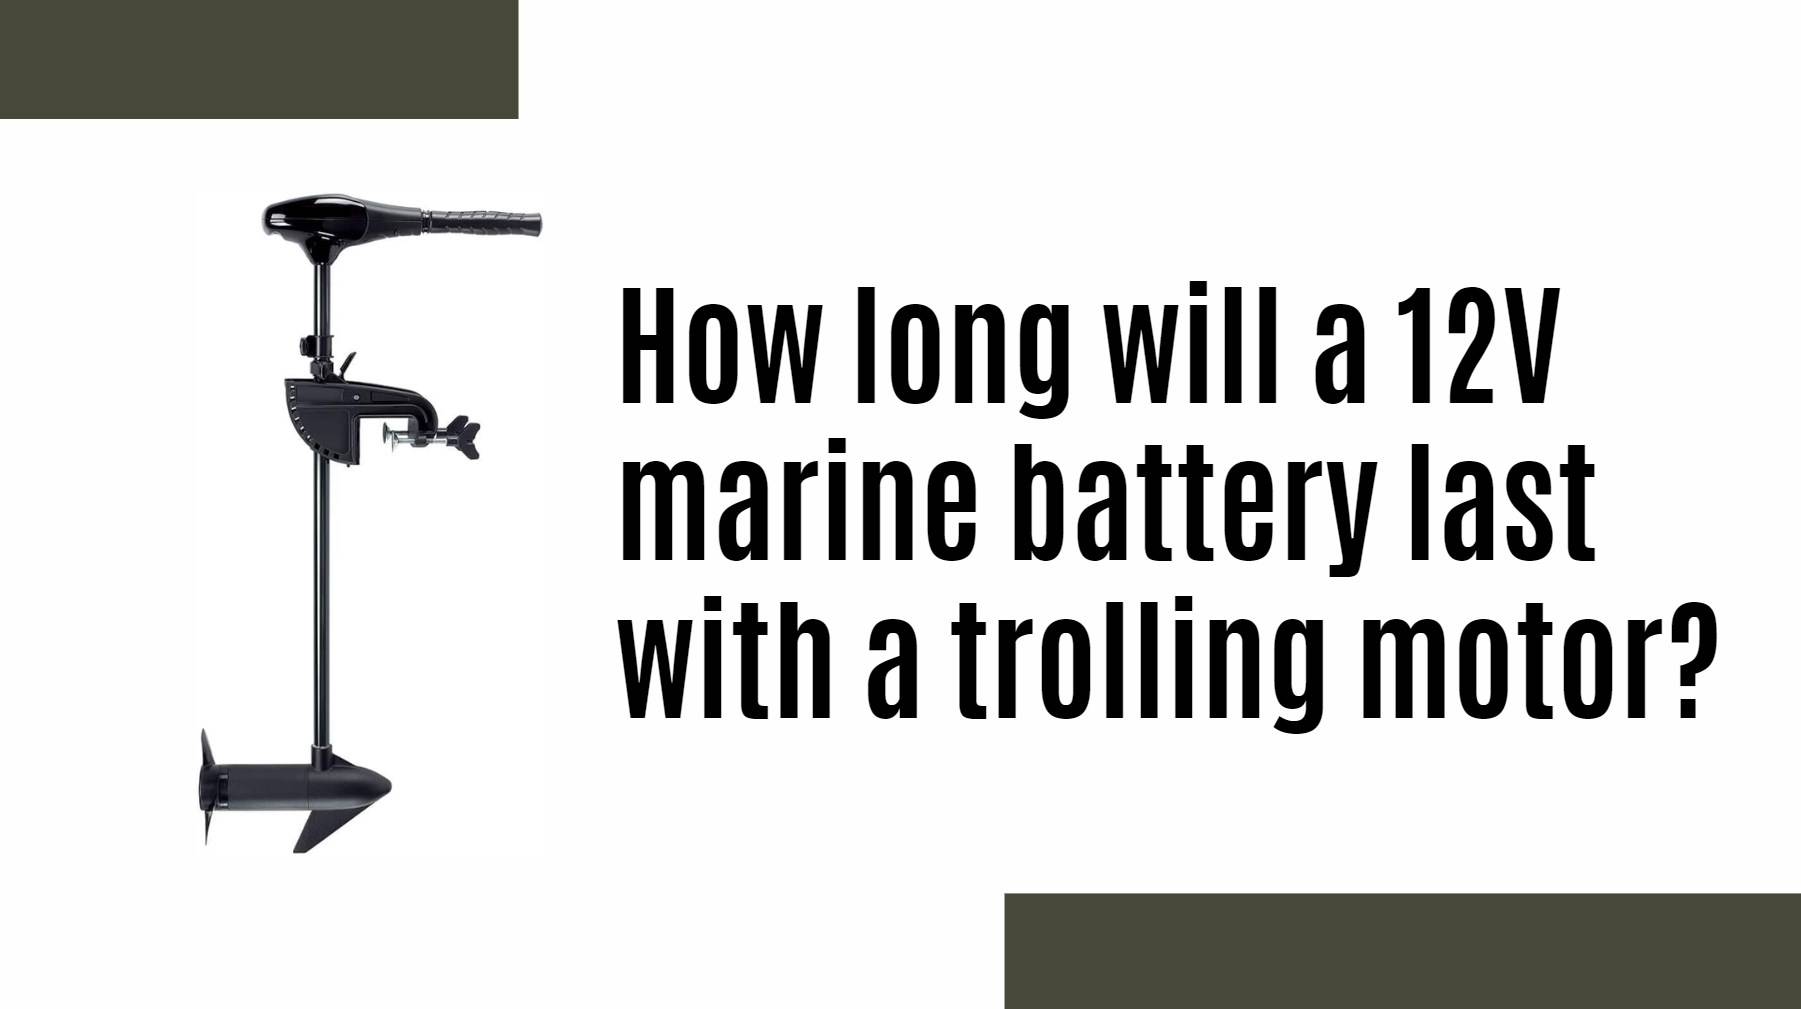 How long will a 12V marine battery last with a trolling motor?